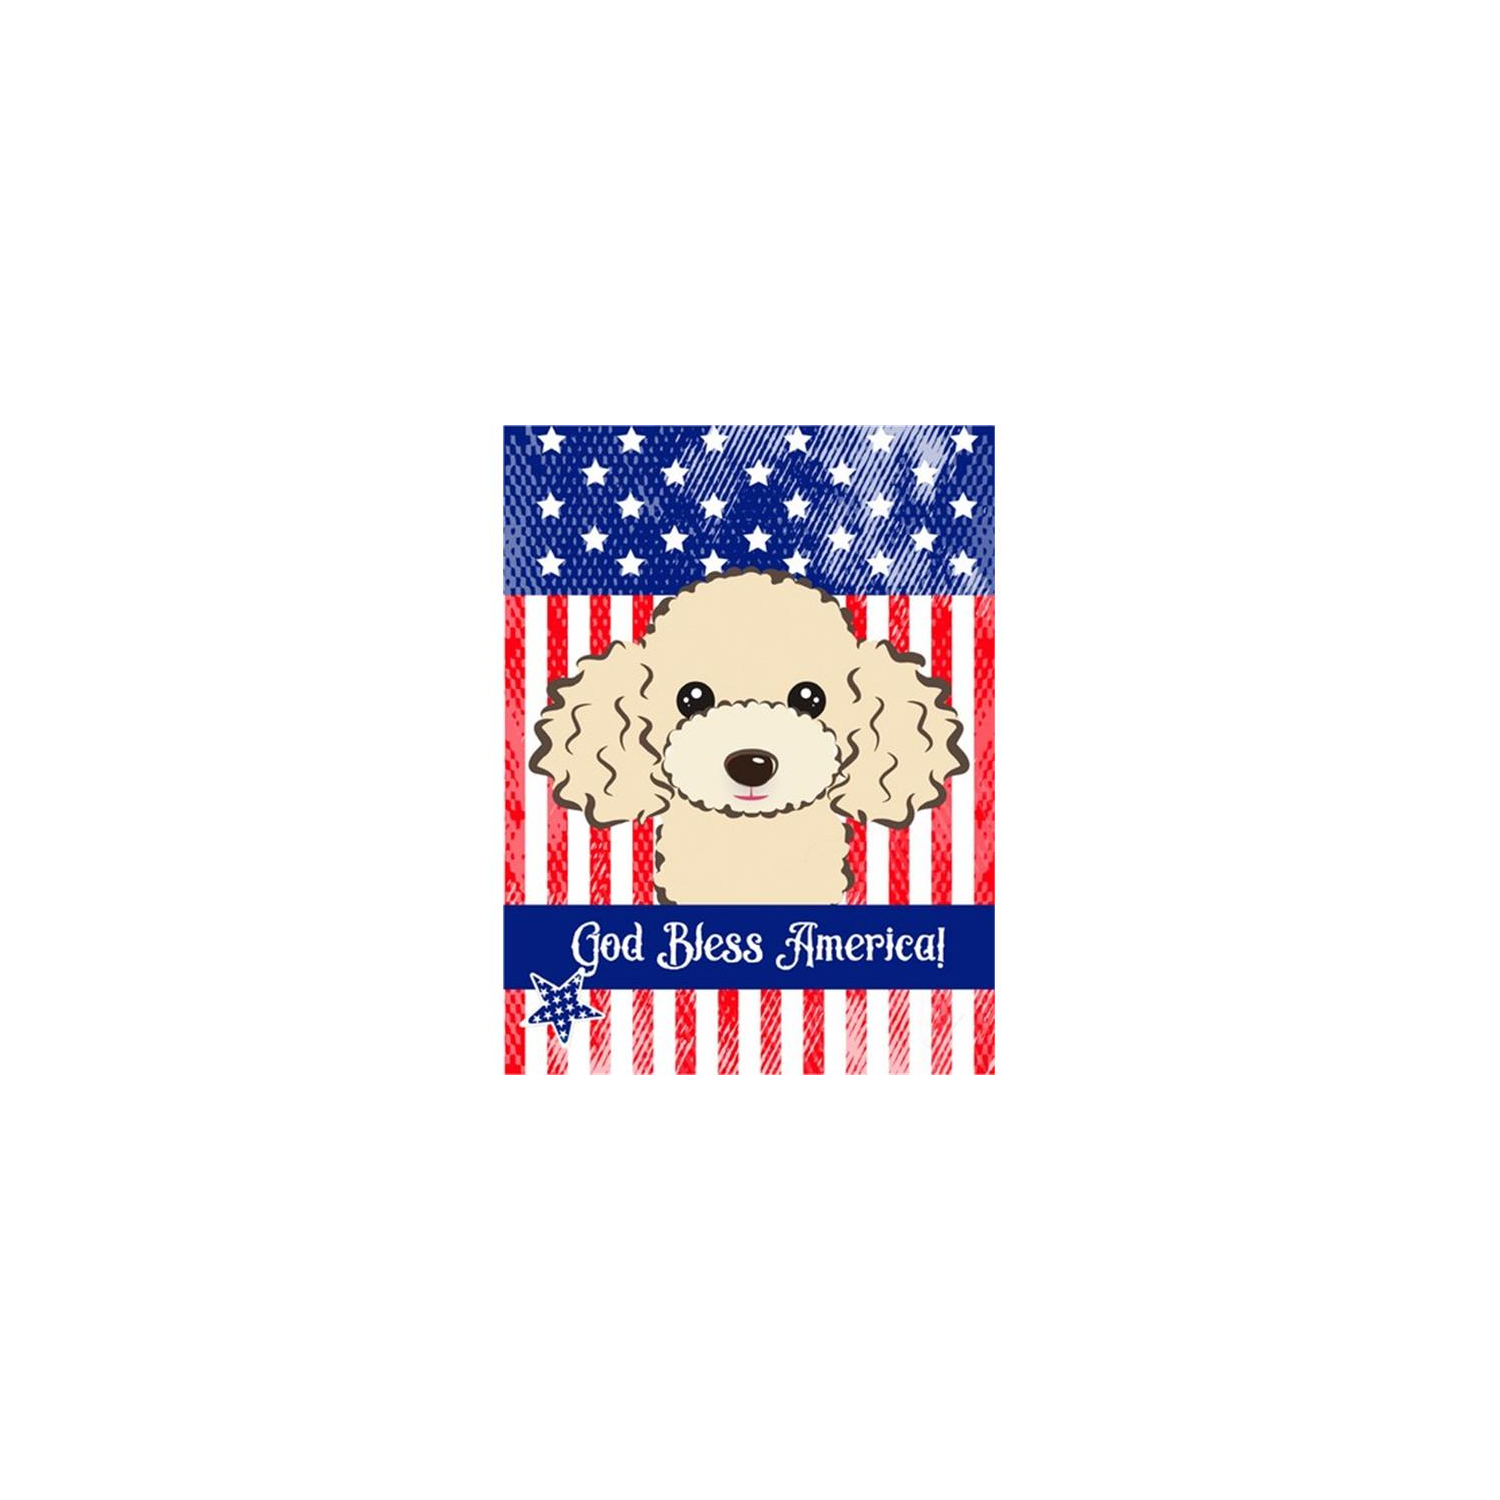 Carolines Treasures BB2188CHF God Bless American Flag with Buff Poodle Canvas House Flag